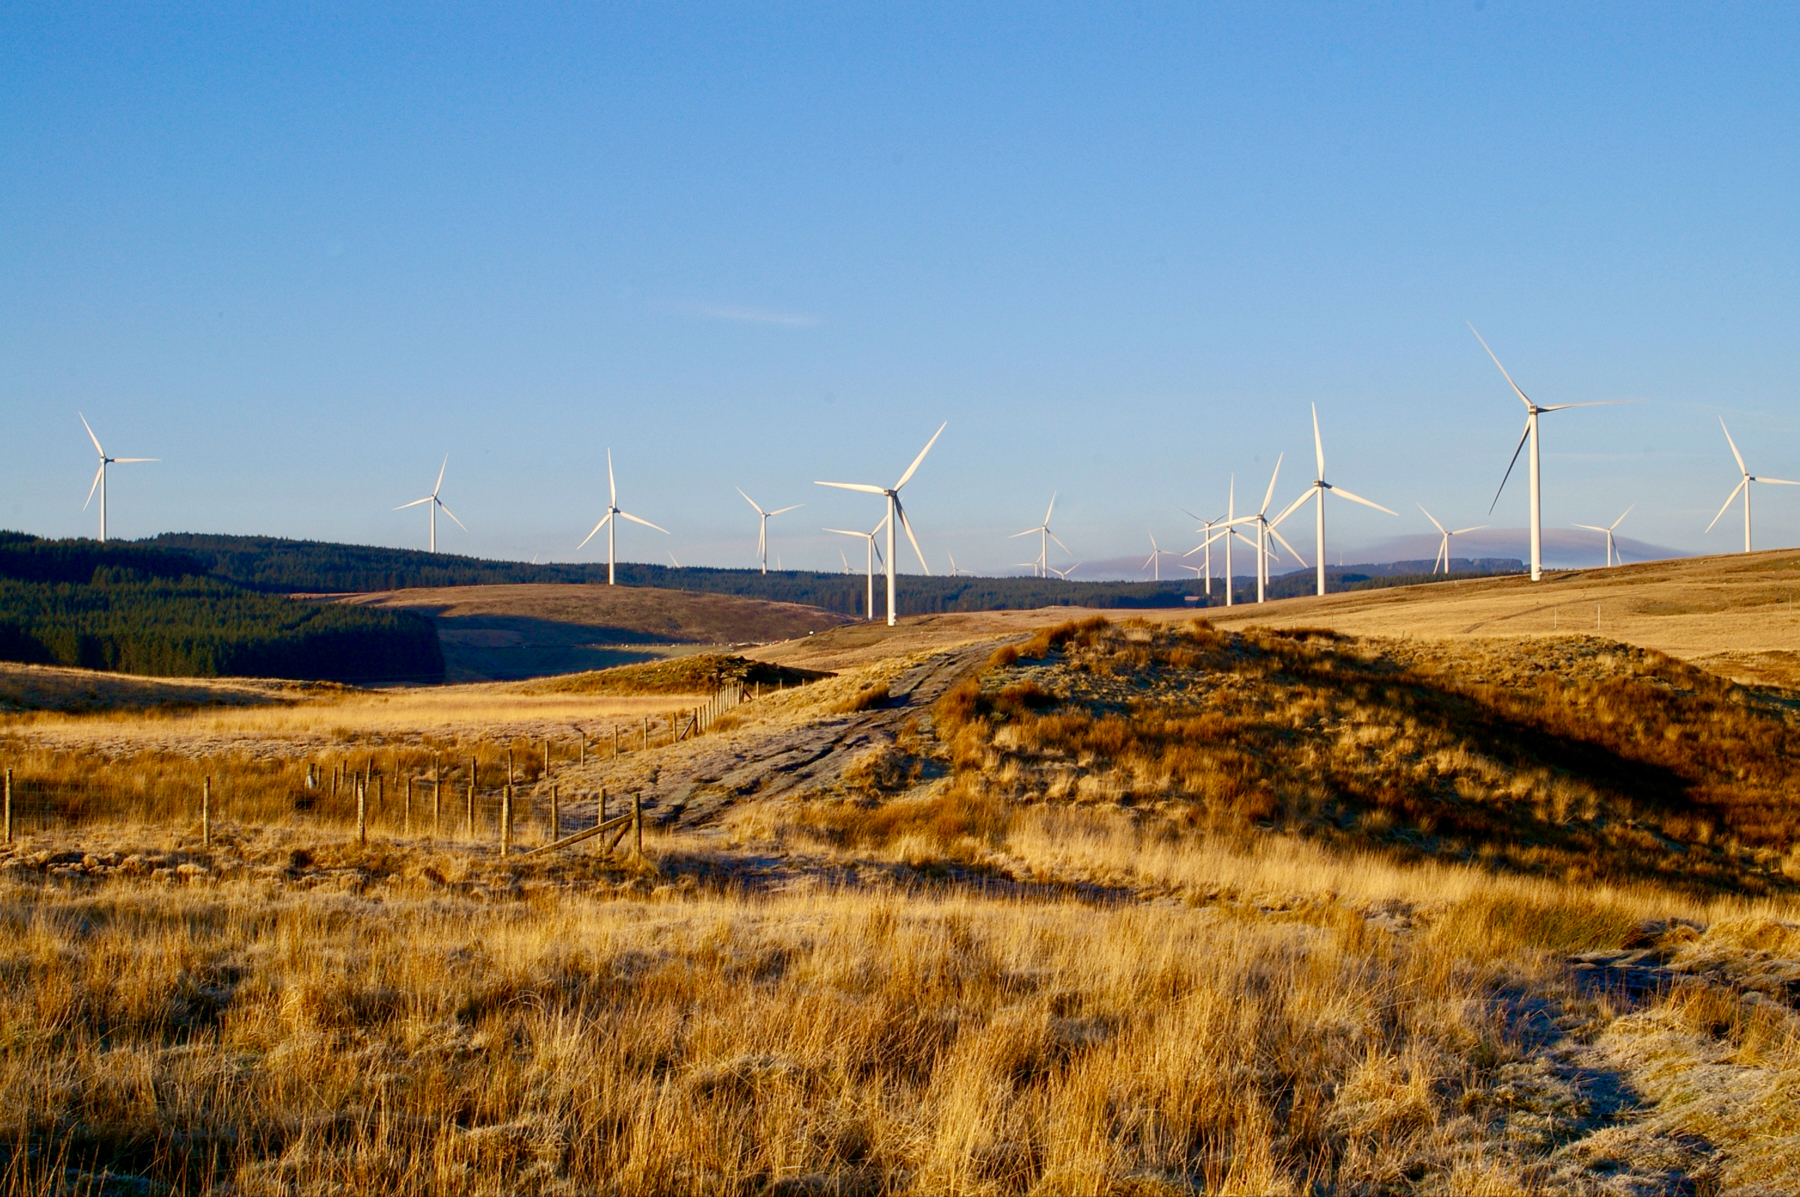 A wind farm with multiple wind turbines in a grassy field under a clear blue sky.